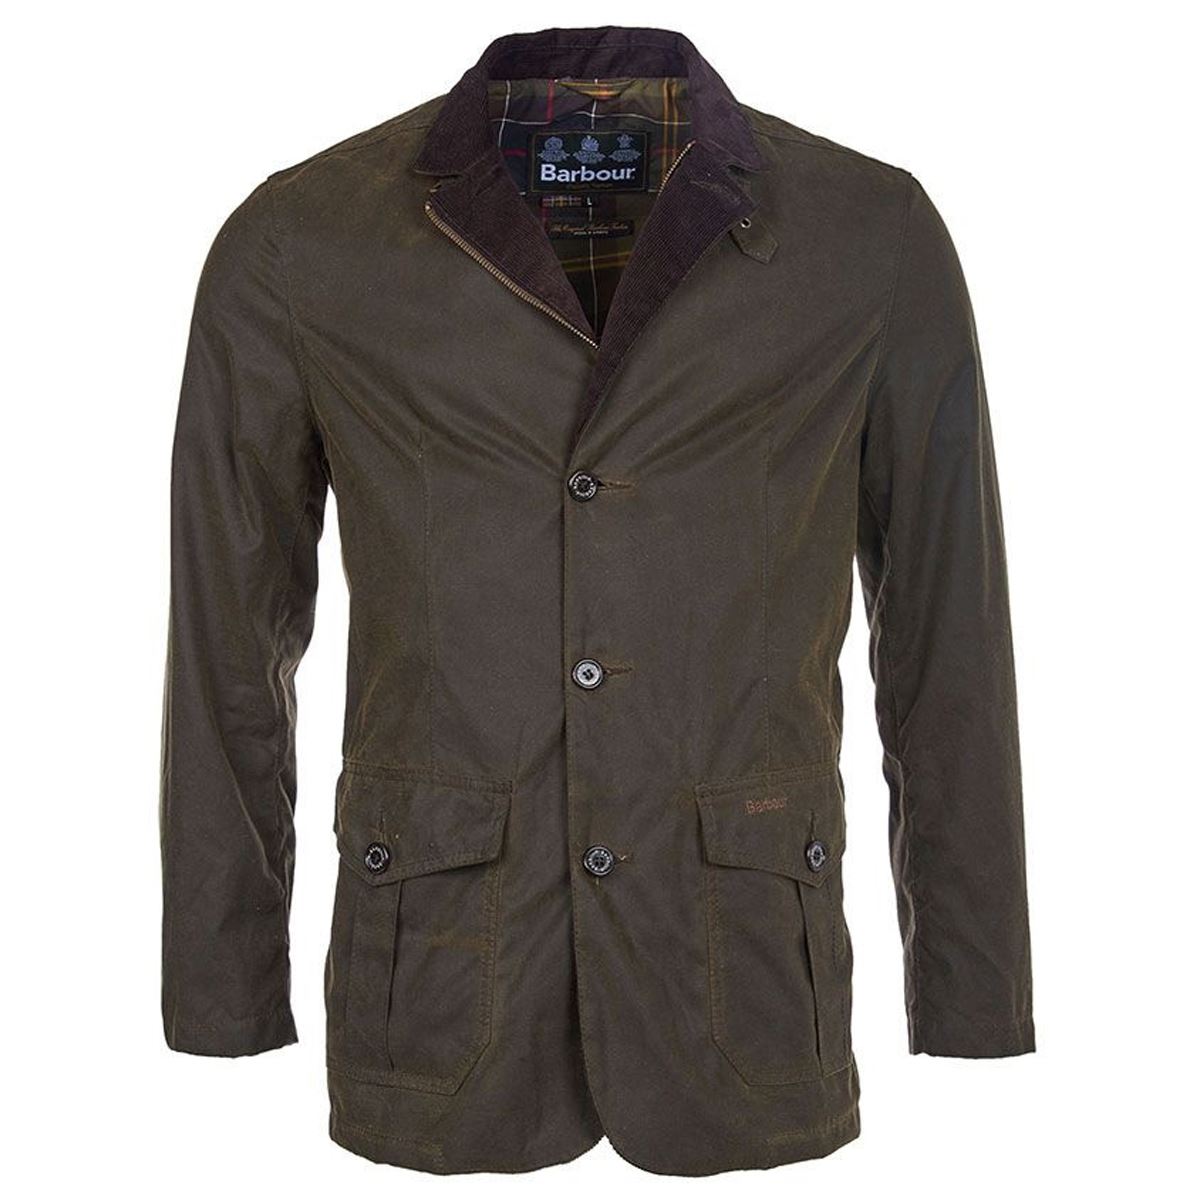 What are the main characteristics of the Barbour Lutz wax jacket?